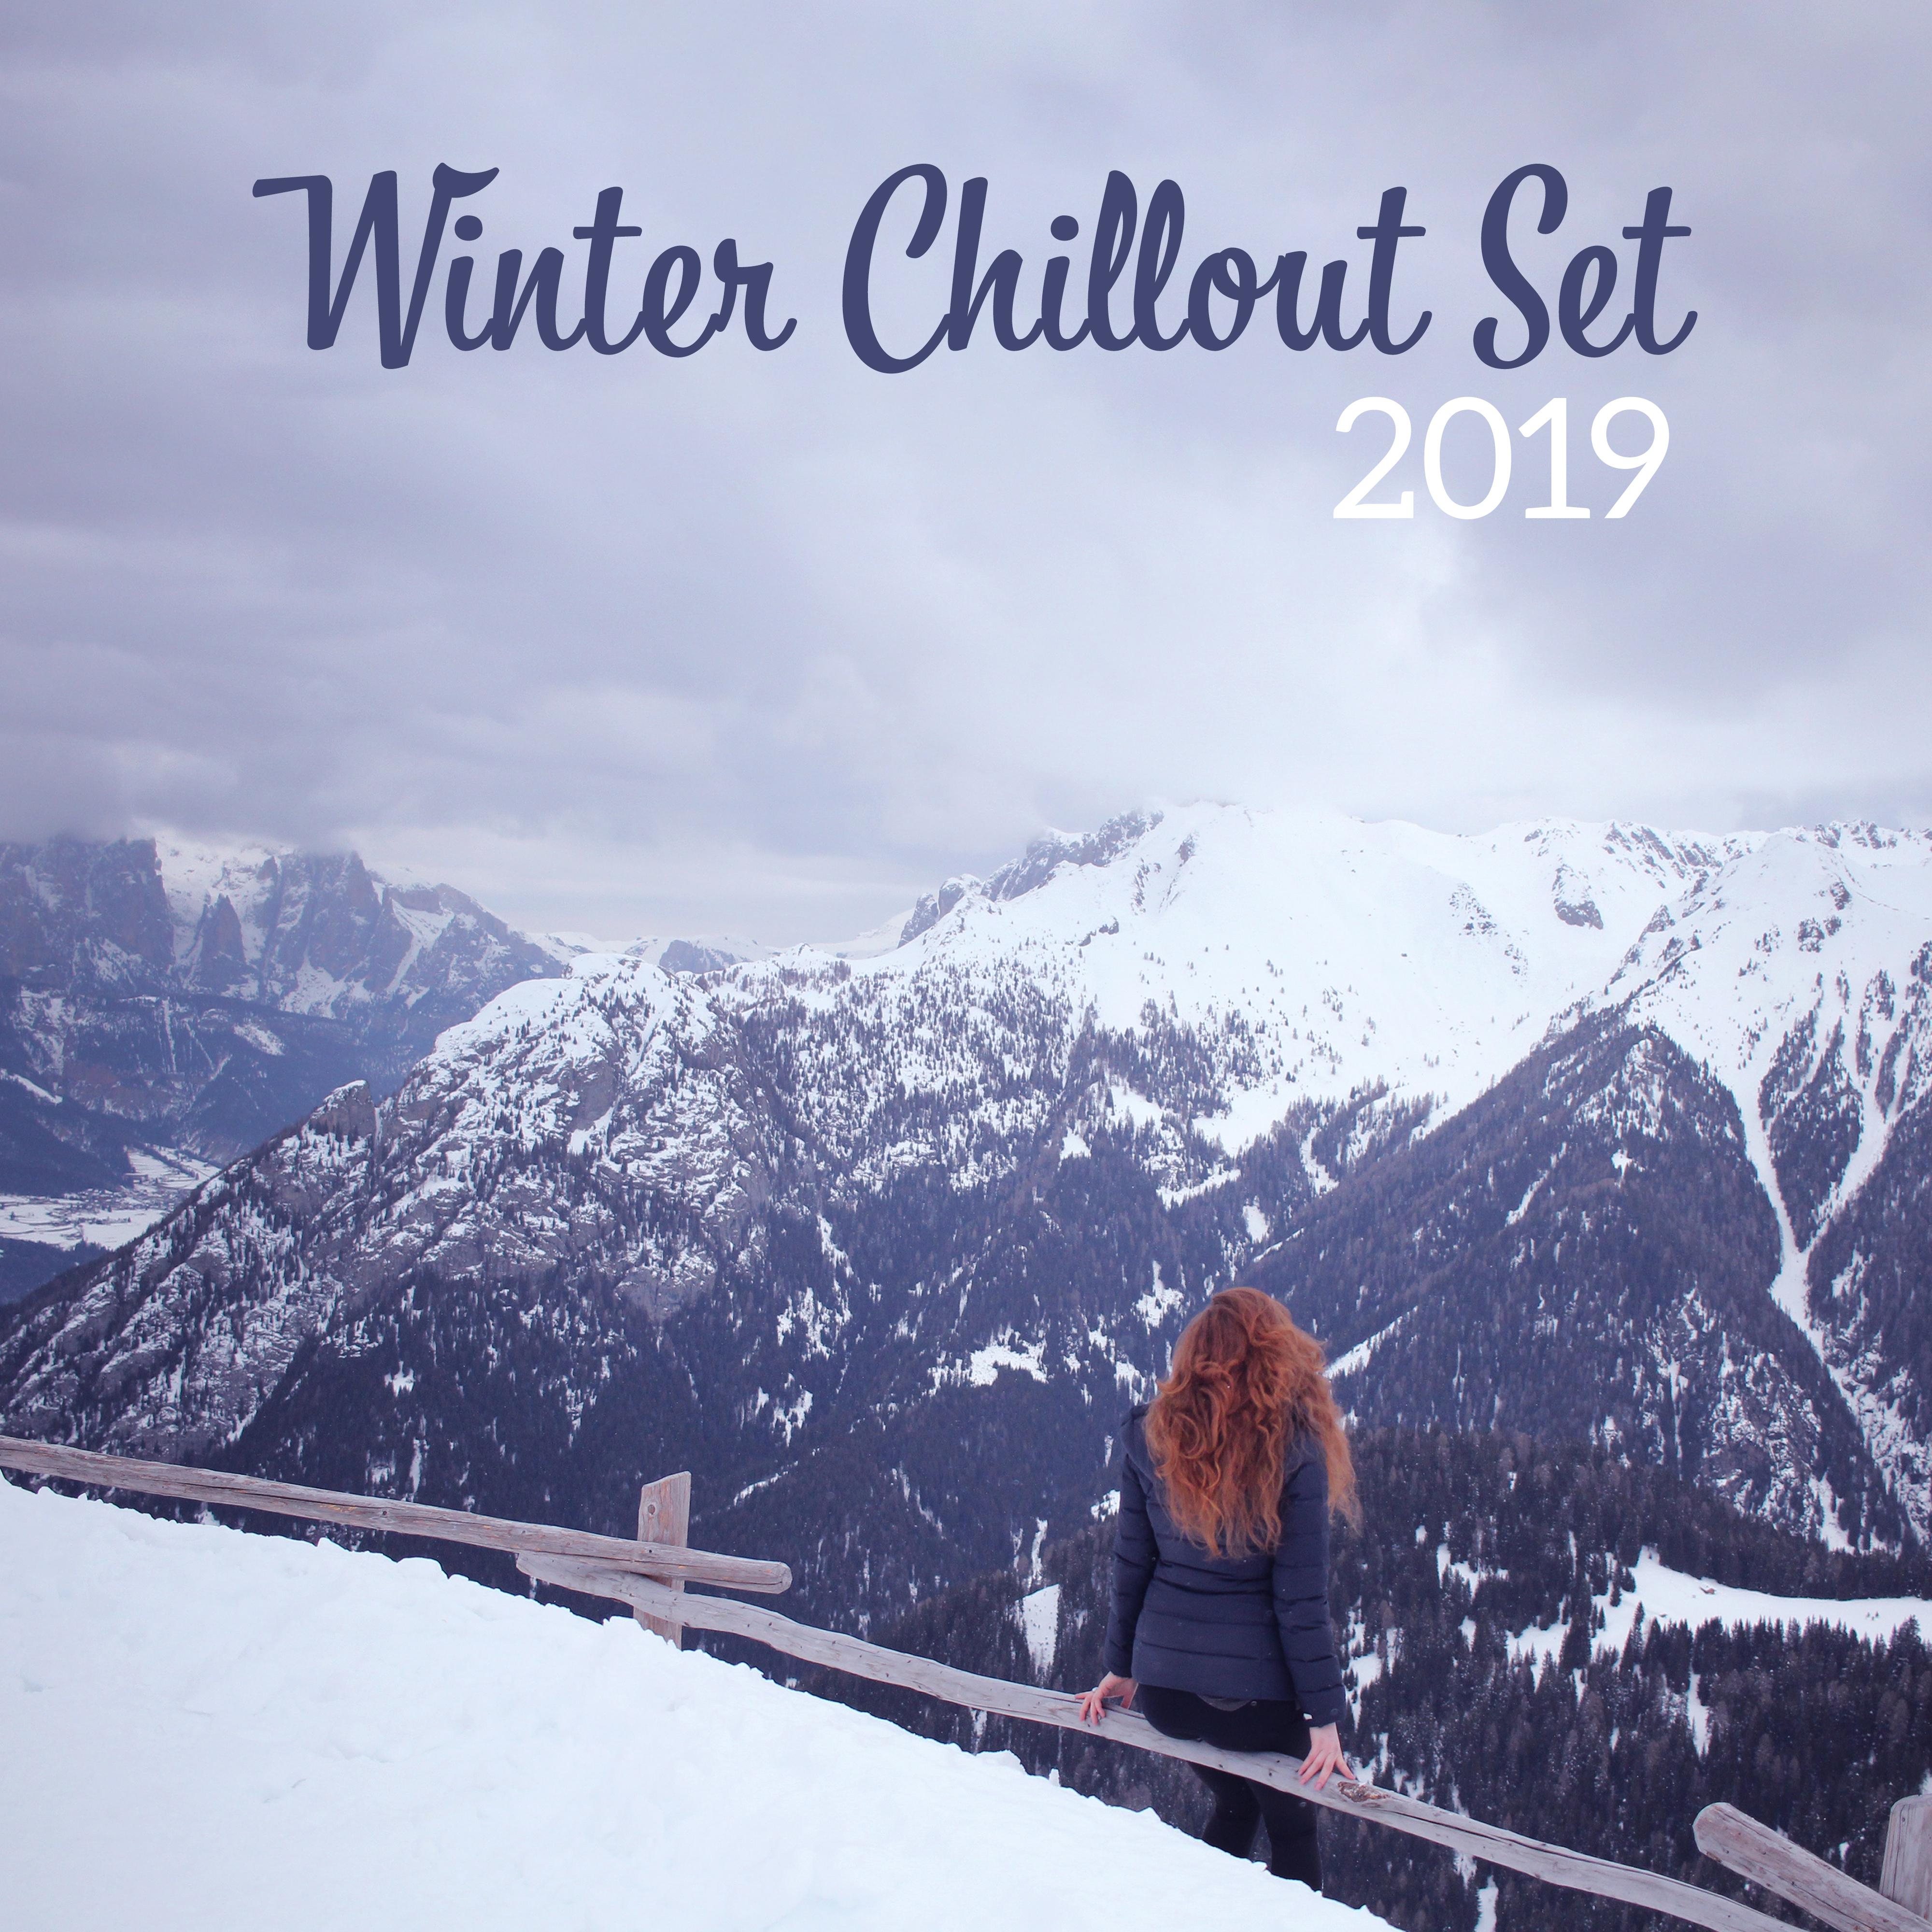 Winter Chillout Set 2019